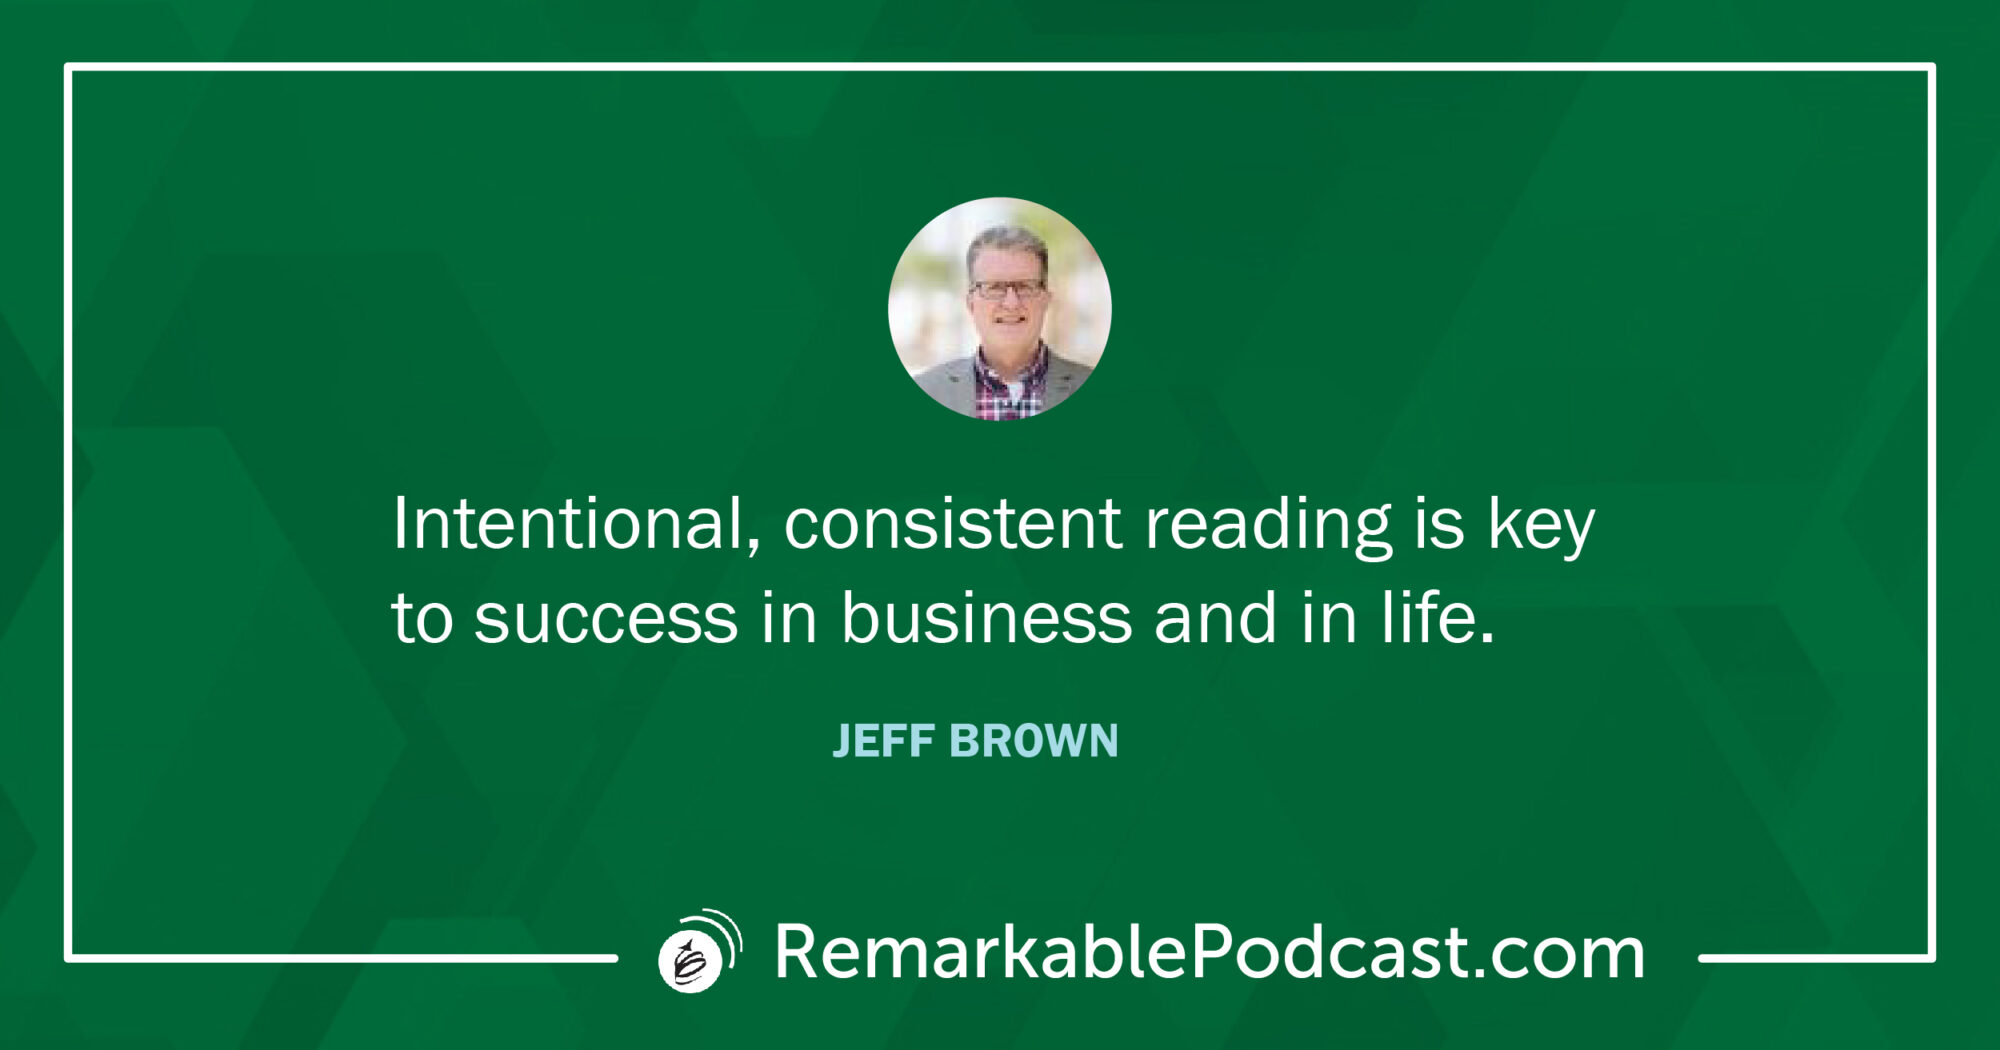 Quote Image: Intentional, consistent reading is key to success in business and in life. Said by Jeff Brown